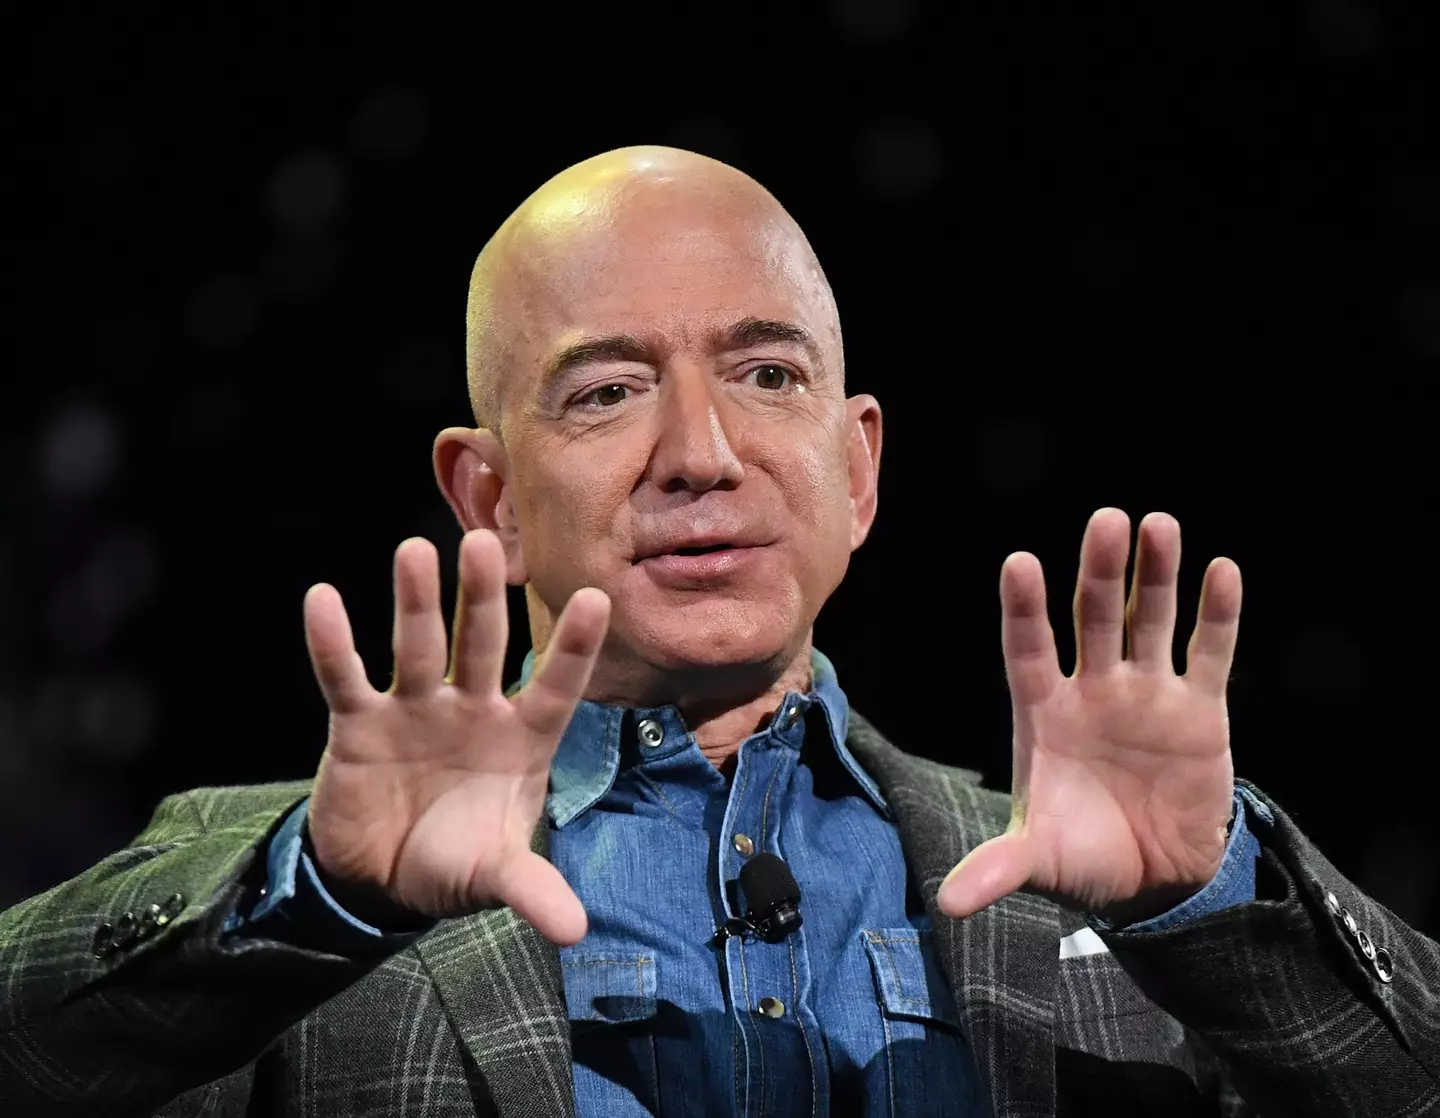 Jeff Bezos is the third richest person in the world.